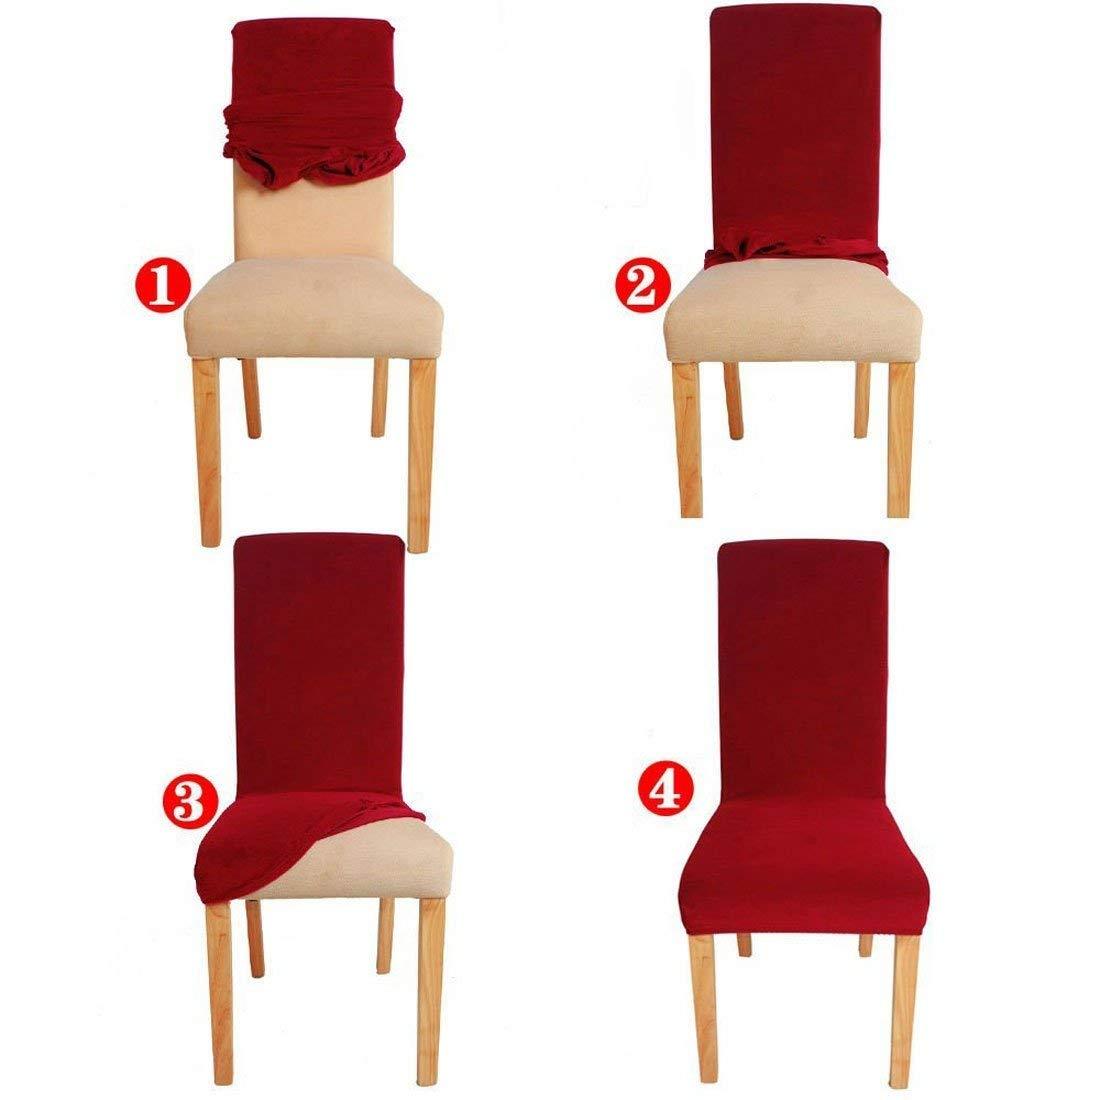 Solid Elastic Chair Cover - Maroon